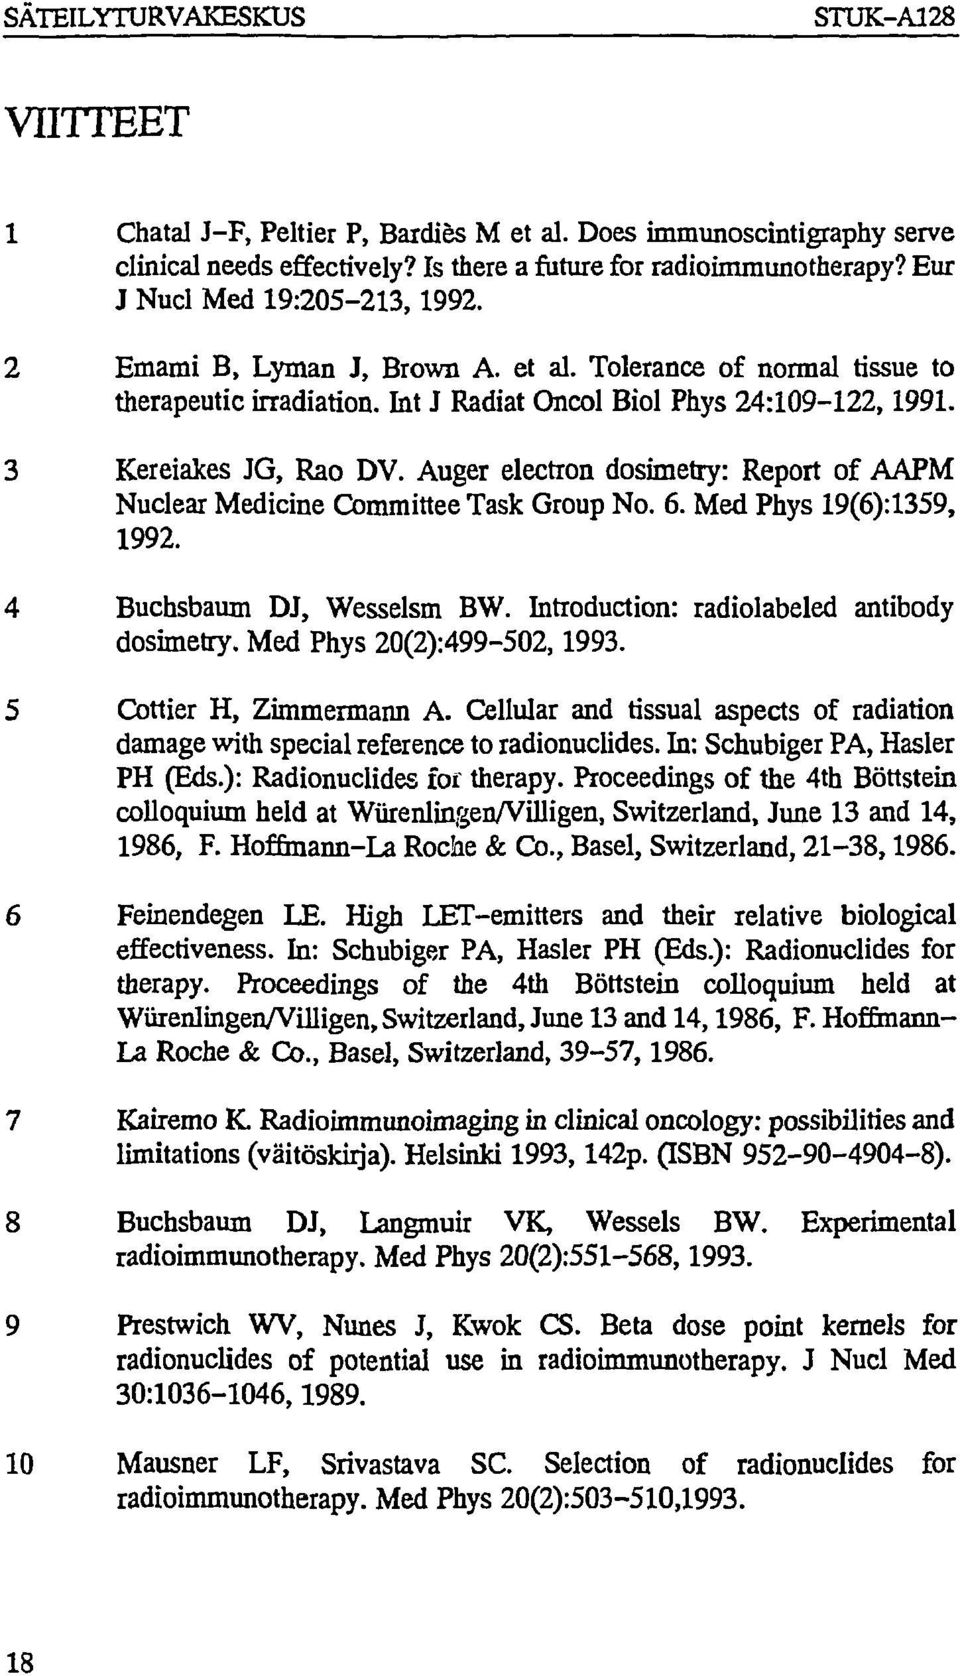 Auger electron dosimetry: Report of AAPM Nuclear Medicine Committee Task Group No. 6. Med Phys 19(6):1359, 1992. 4 Buchsbaum DJ, Wesselsm BW. Introduction: radiolabeled antibody dosimetry.